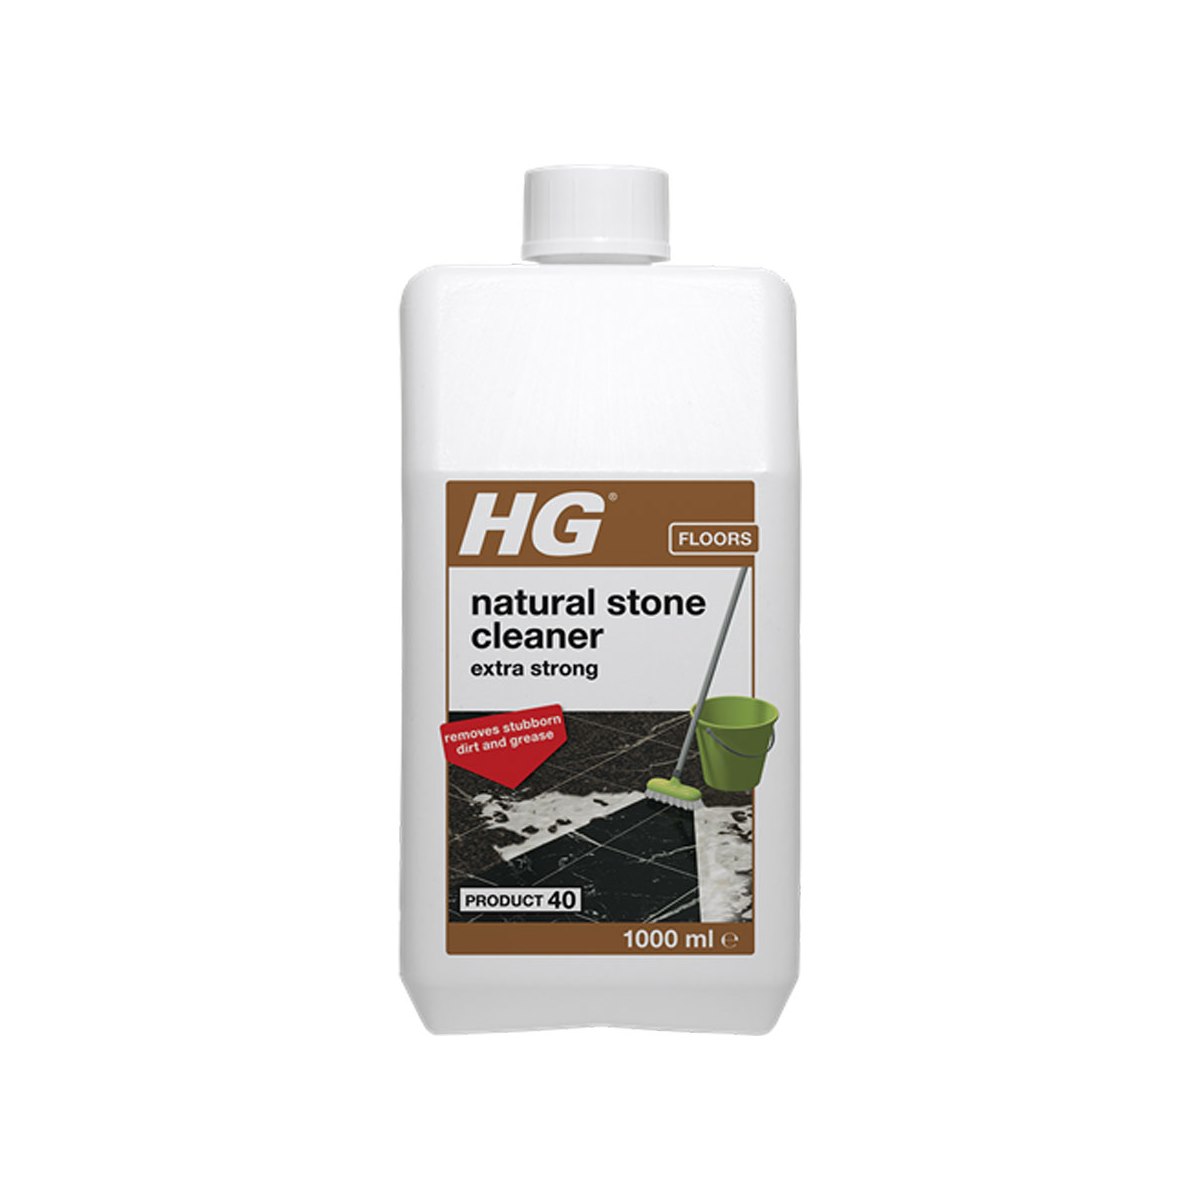 HG Natural Stone Cleaner Extra Strong 1 Litre Product 40